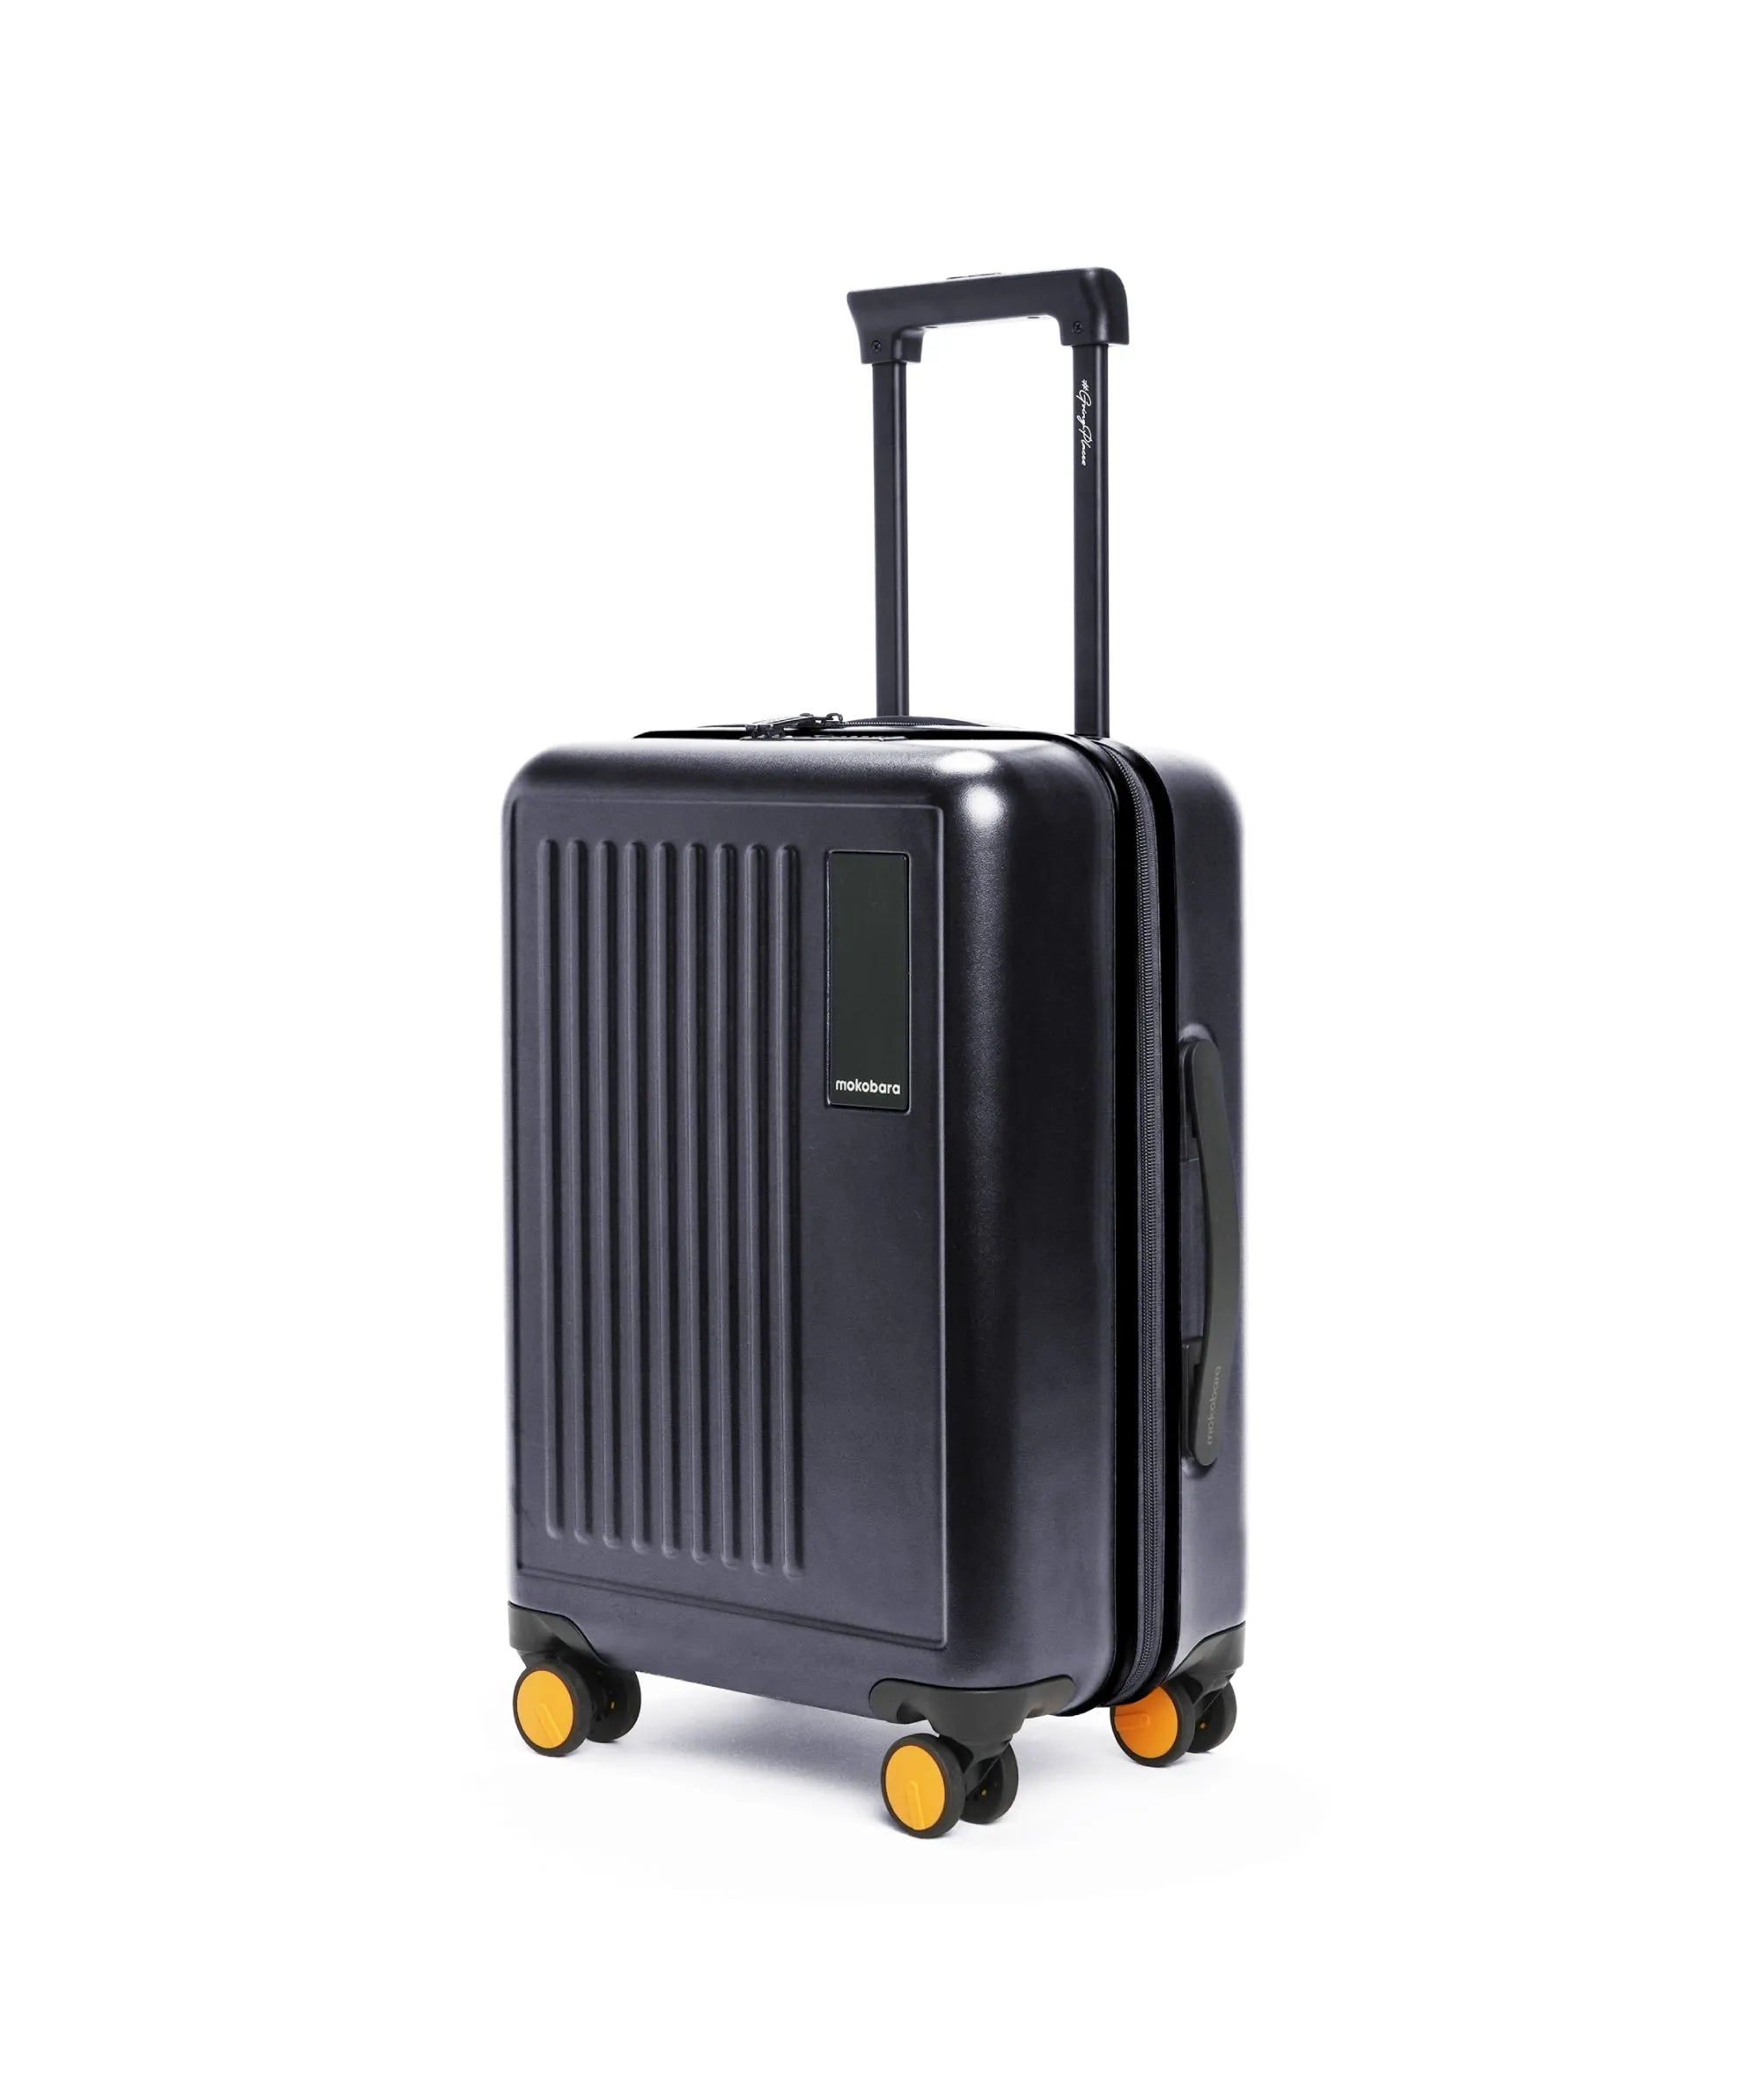 Color_Crypto | The Transit Luggage - Cabin